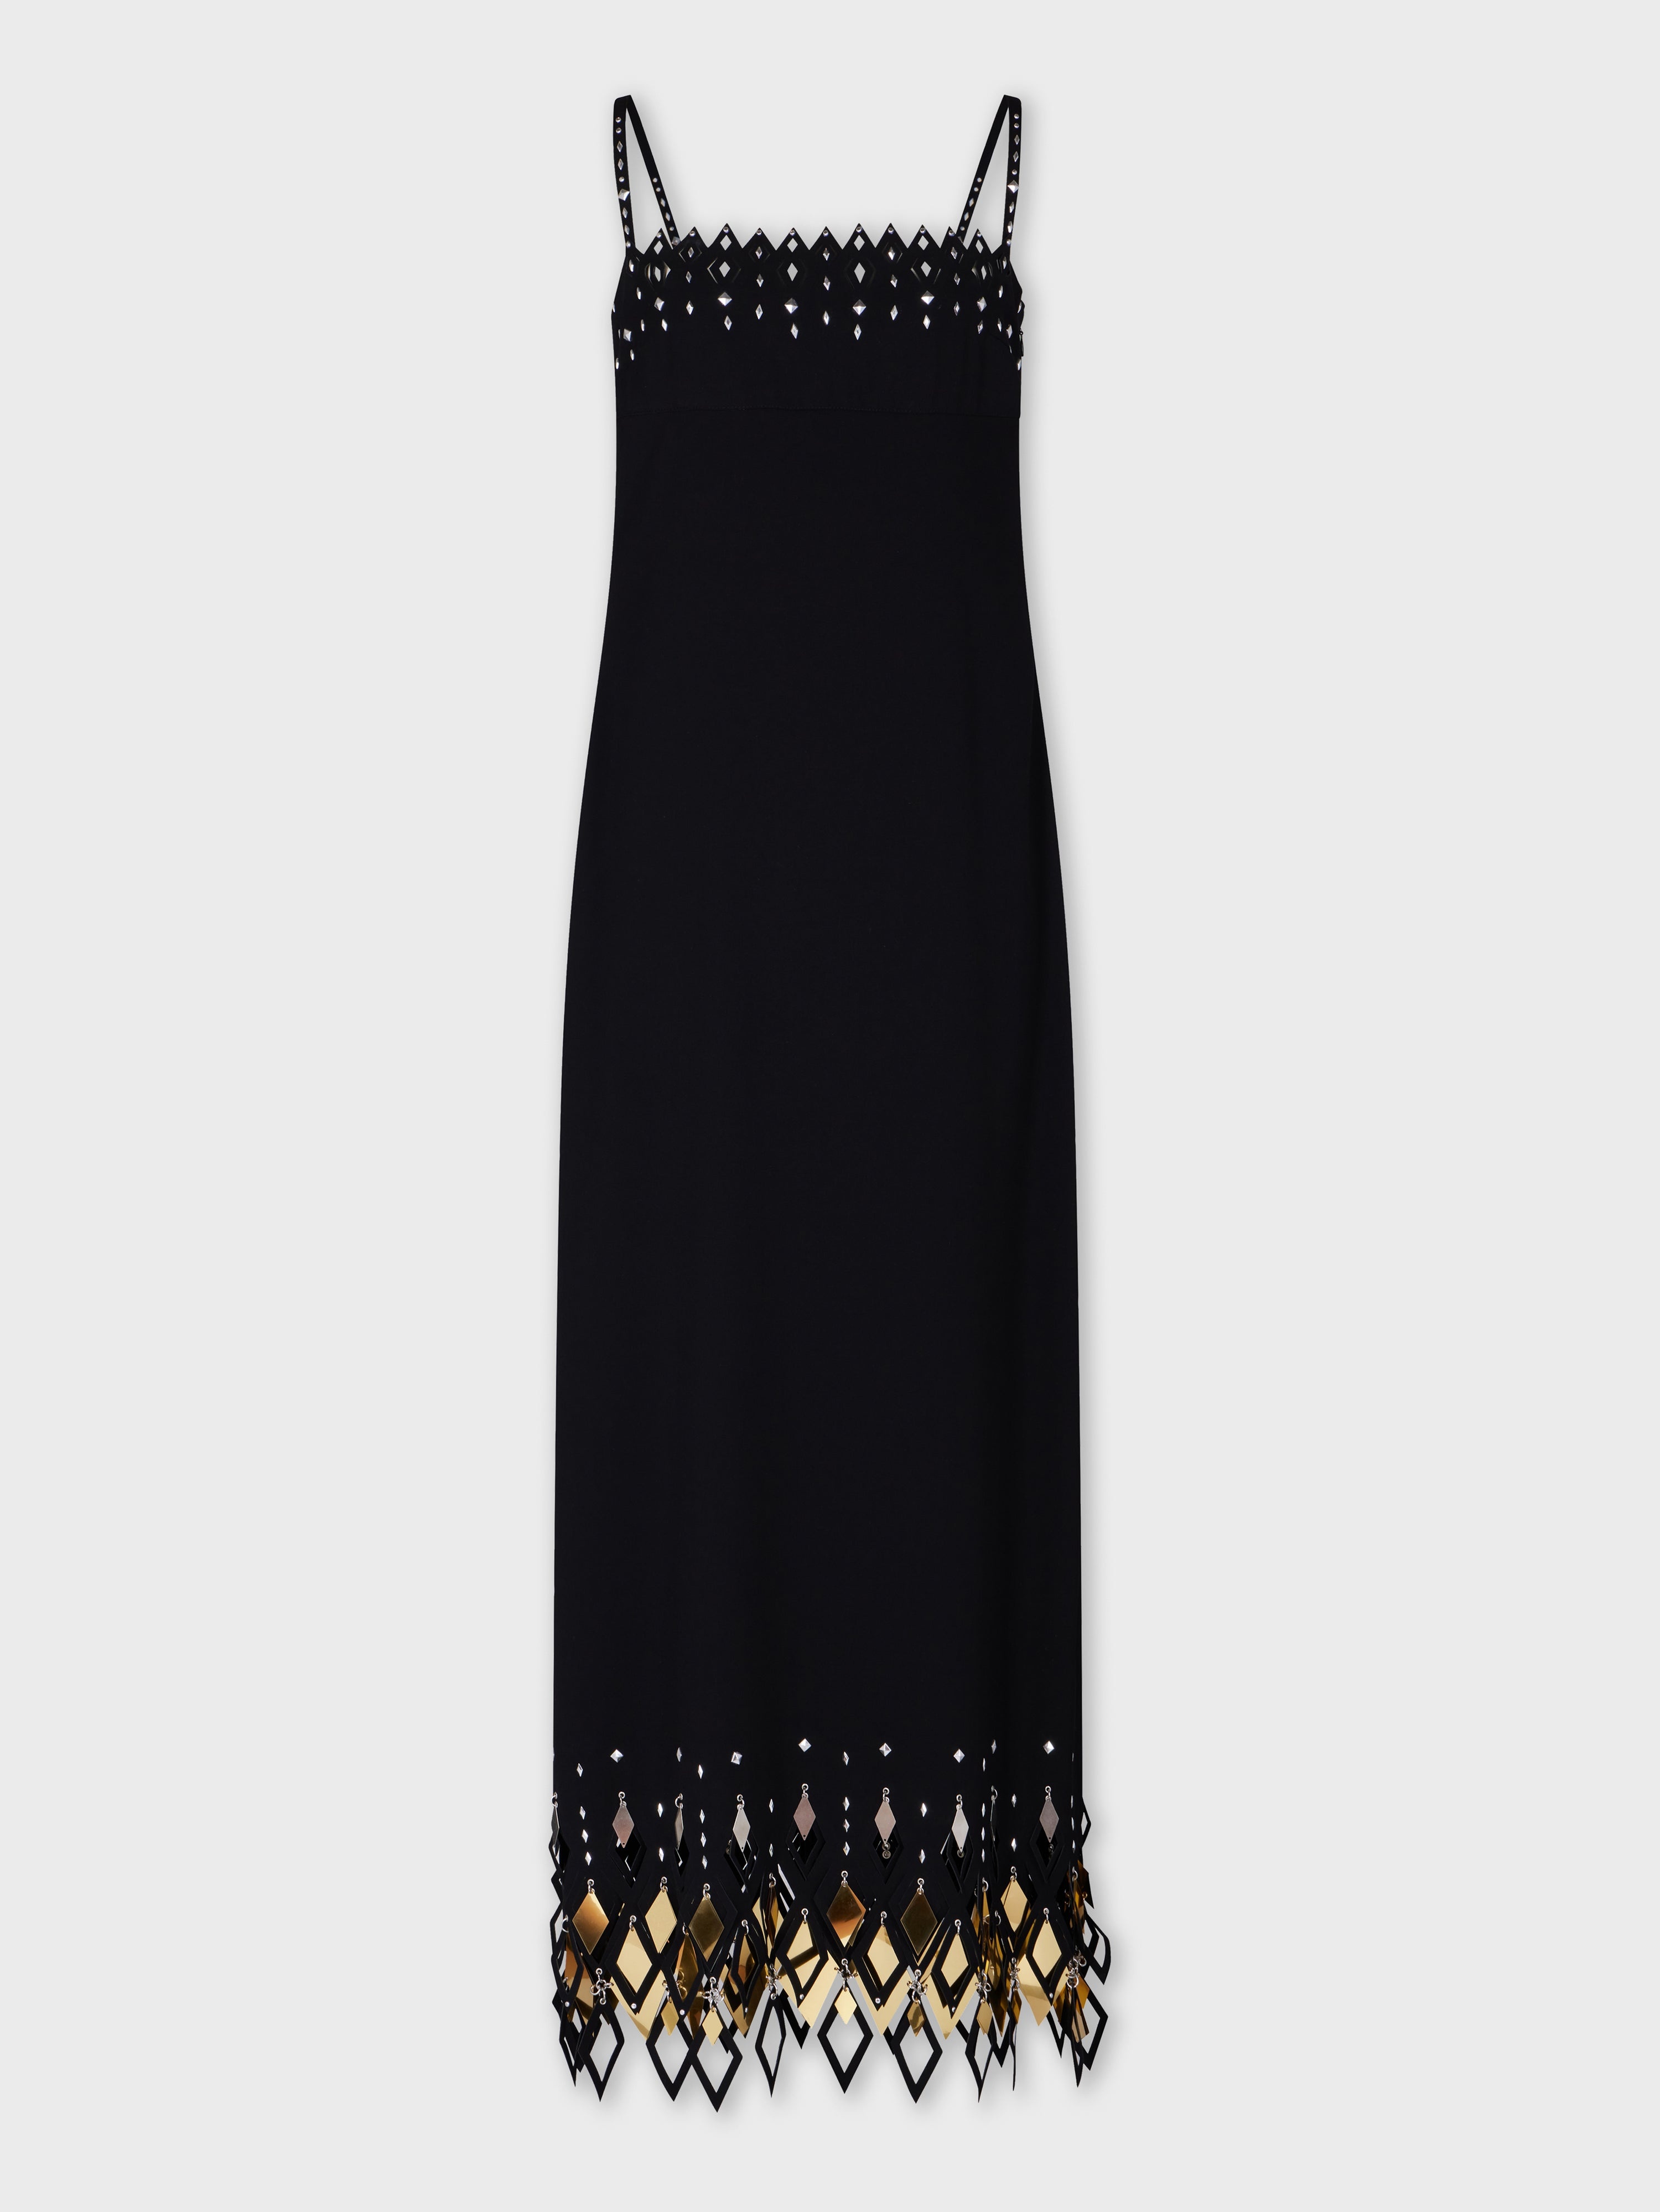 Black/White Embellished with Metal Chain Details - Maxi Dress